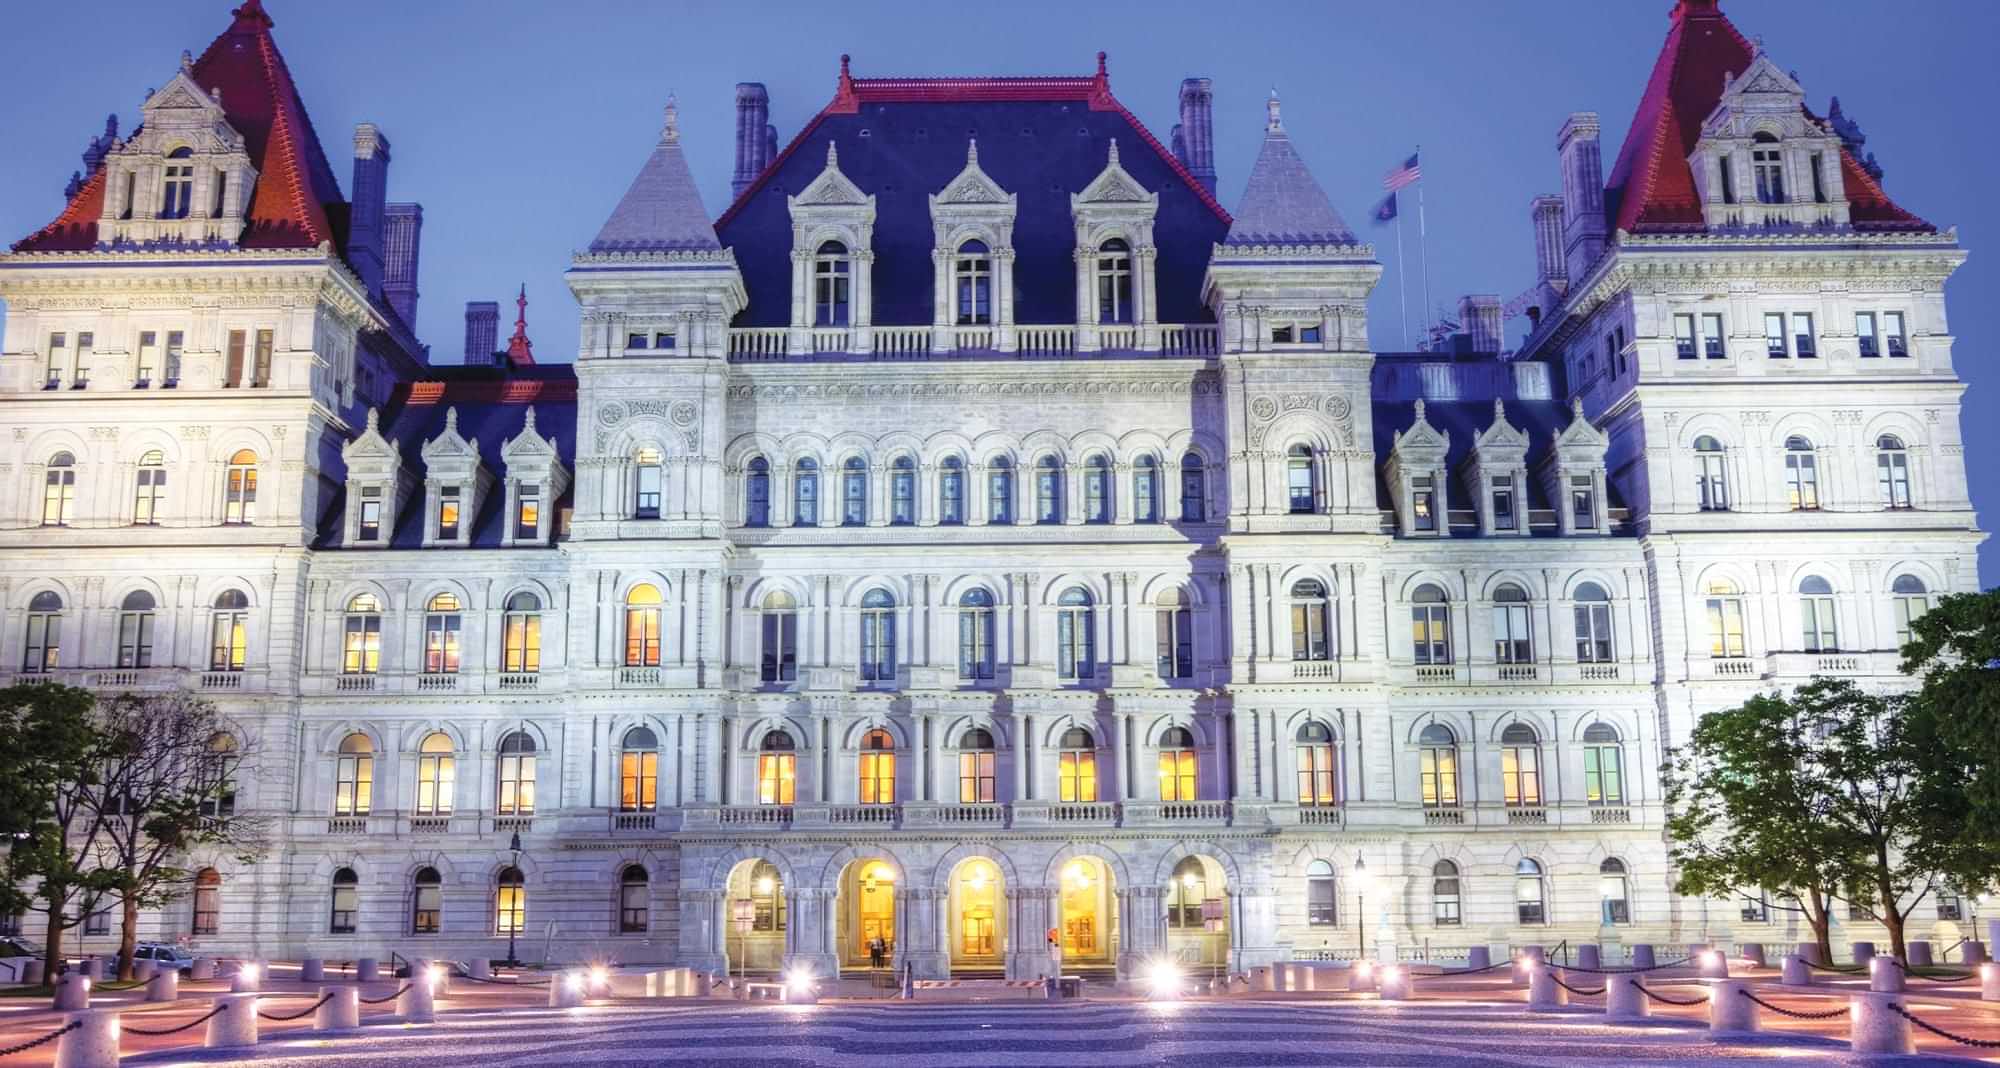 the New York State capitol building